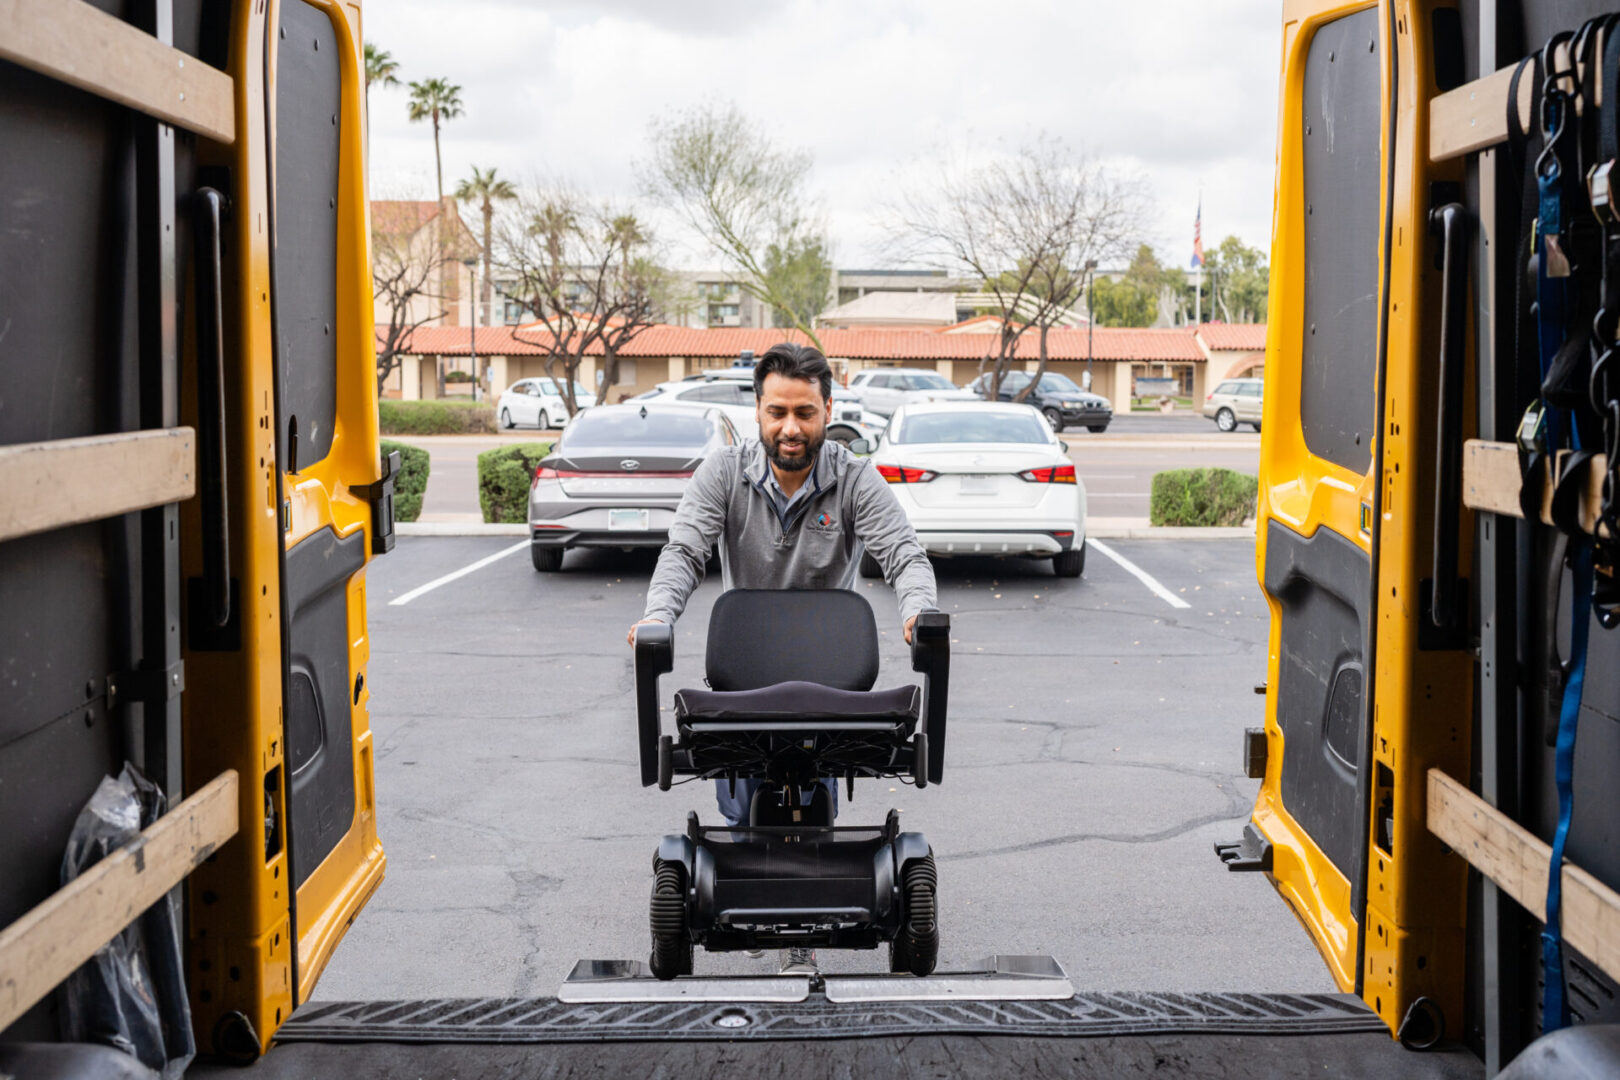 A person loading the mobility device in the truck